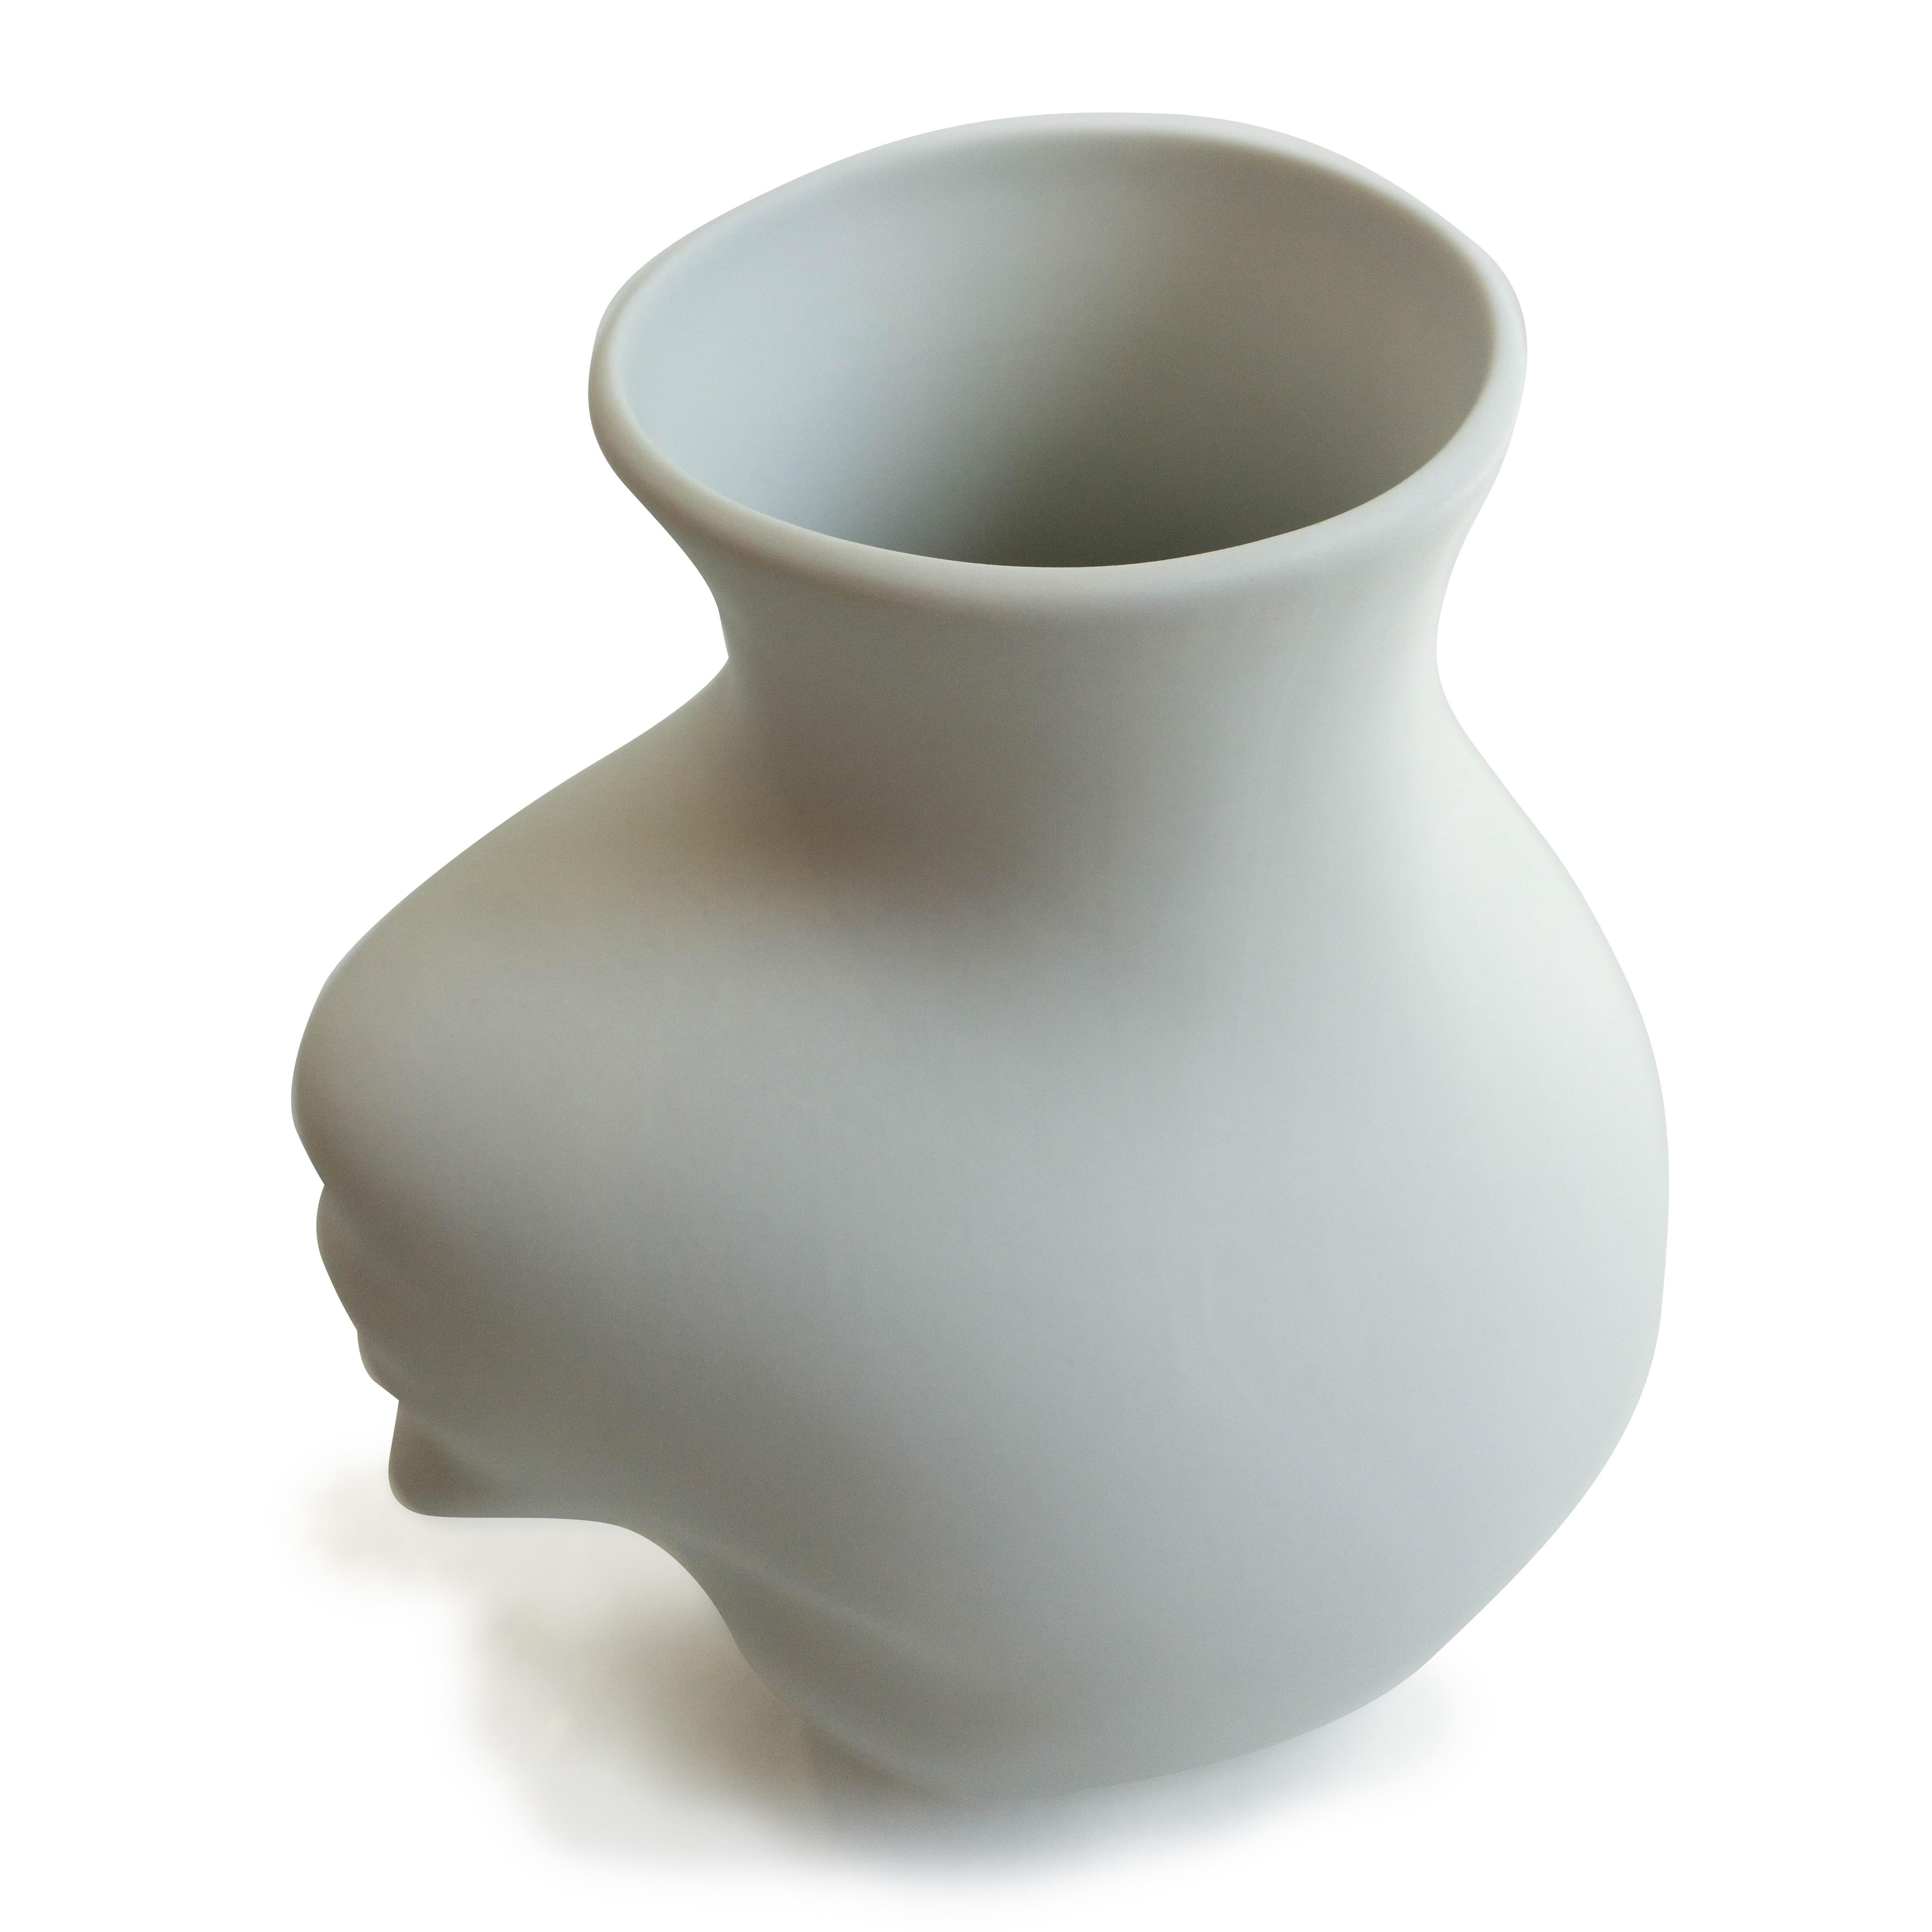 Designed by Koens & Middelkoop, this vase is unglazed porcelain sculpted into a human head shape. 

Dimensions: 10”H x 6”W x 8”L